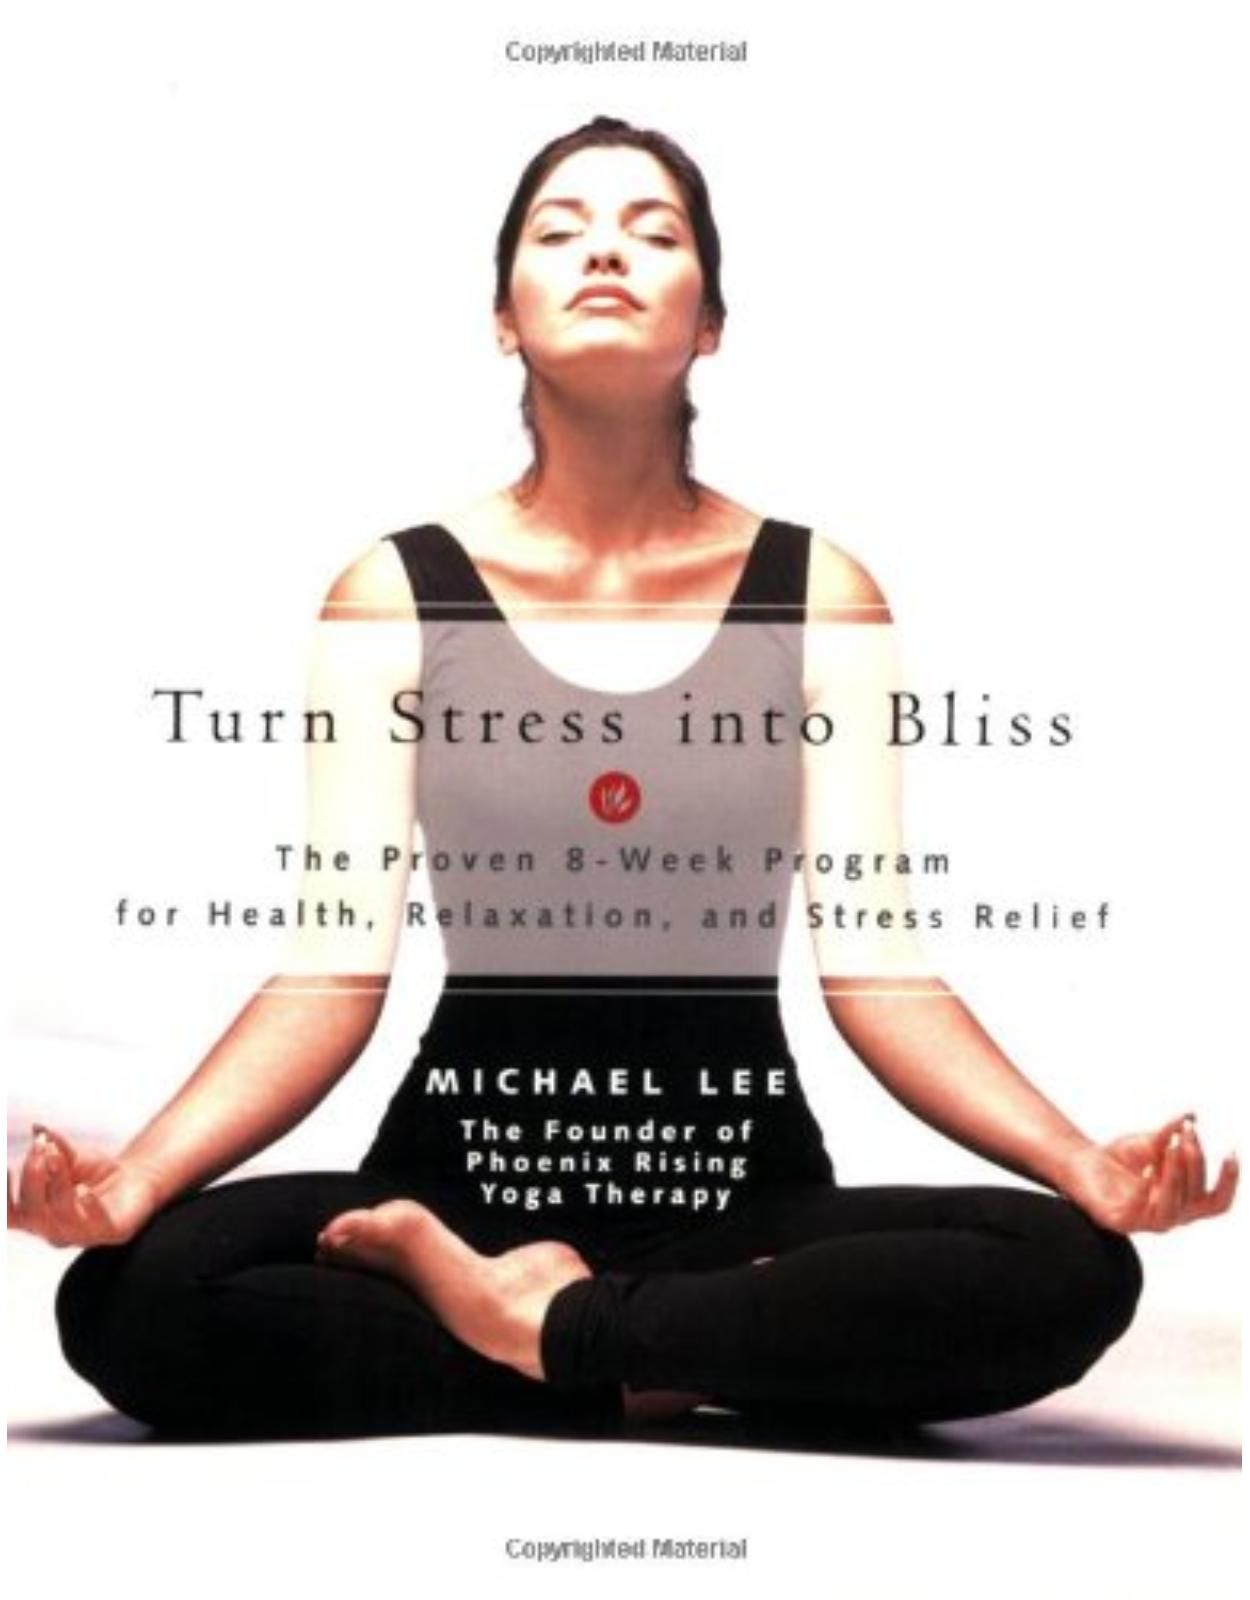 Turn Stress into Bliss